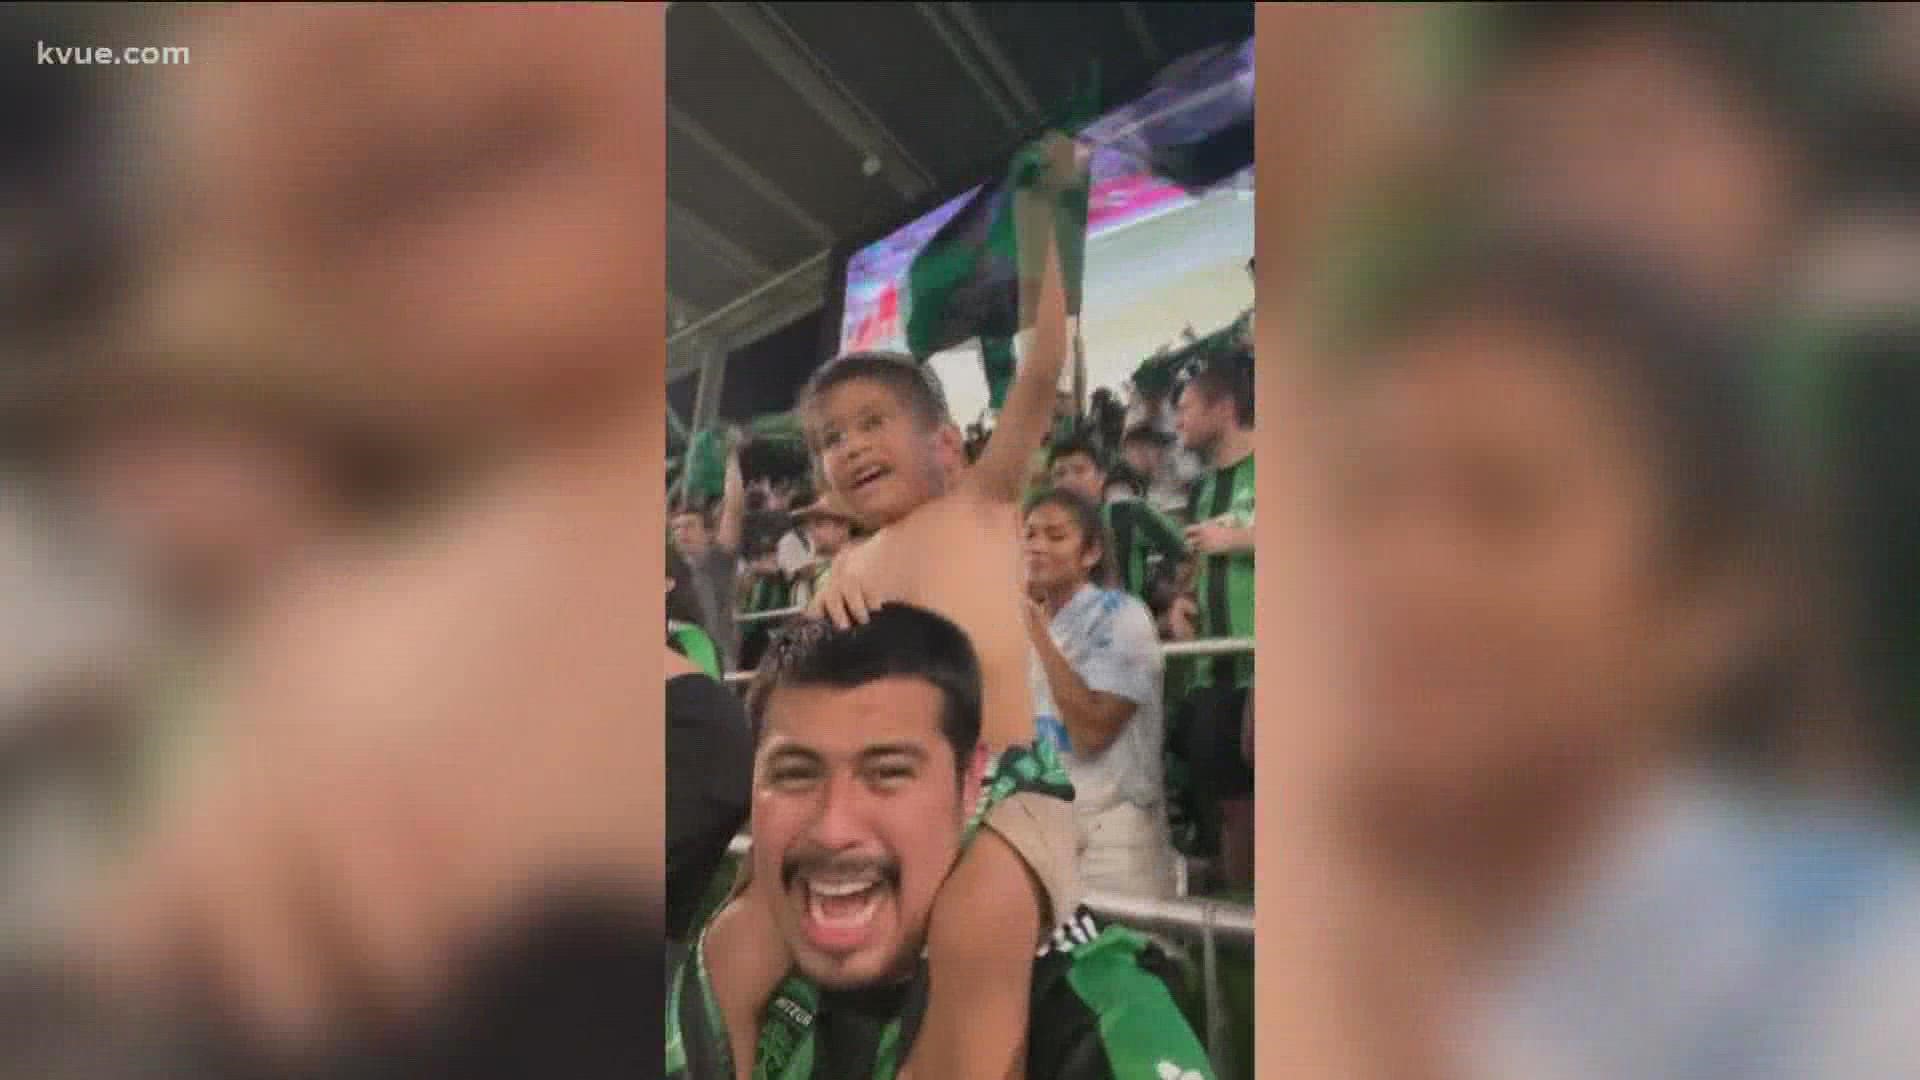 William Heredia and his 3-year-old son Sebastian have become popular fans within the Austin FC supporter's section for their heartwarming celebrations.